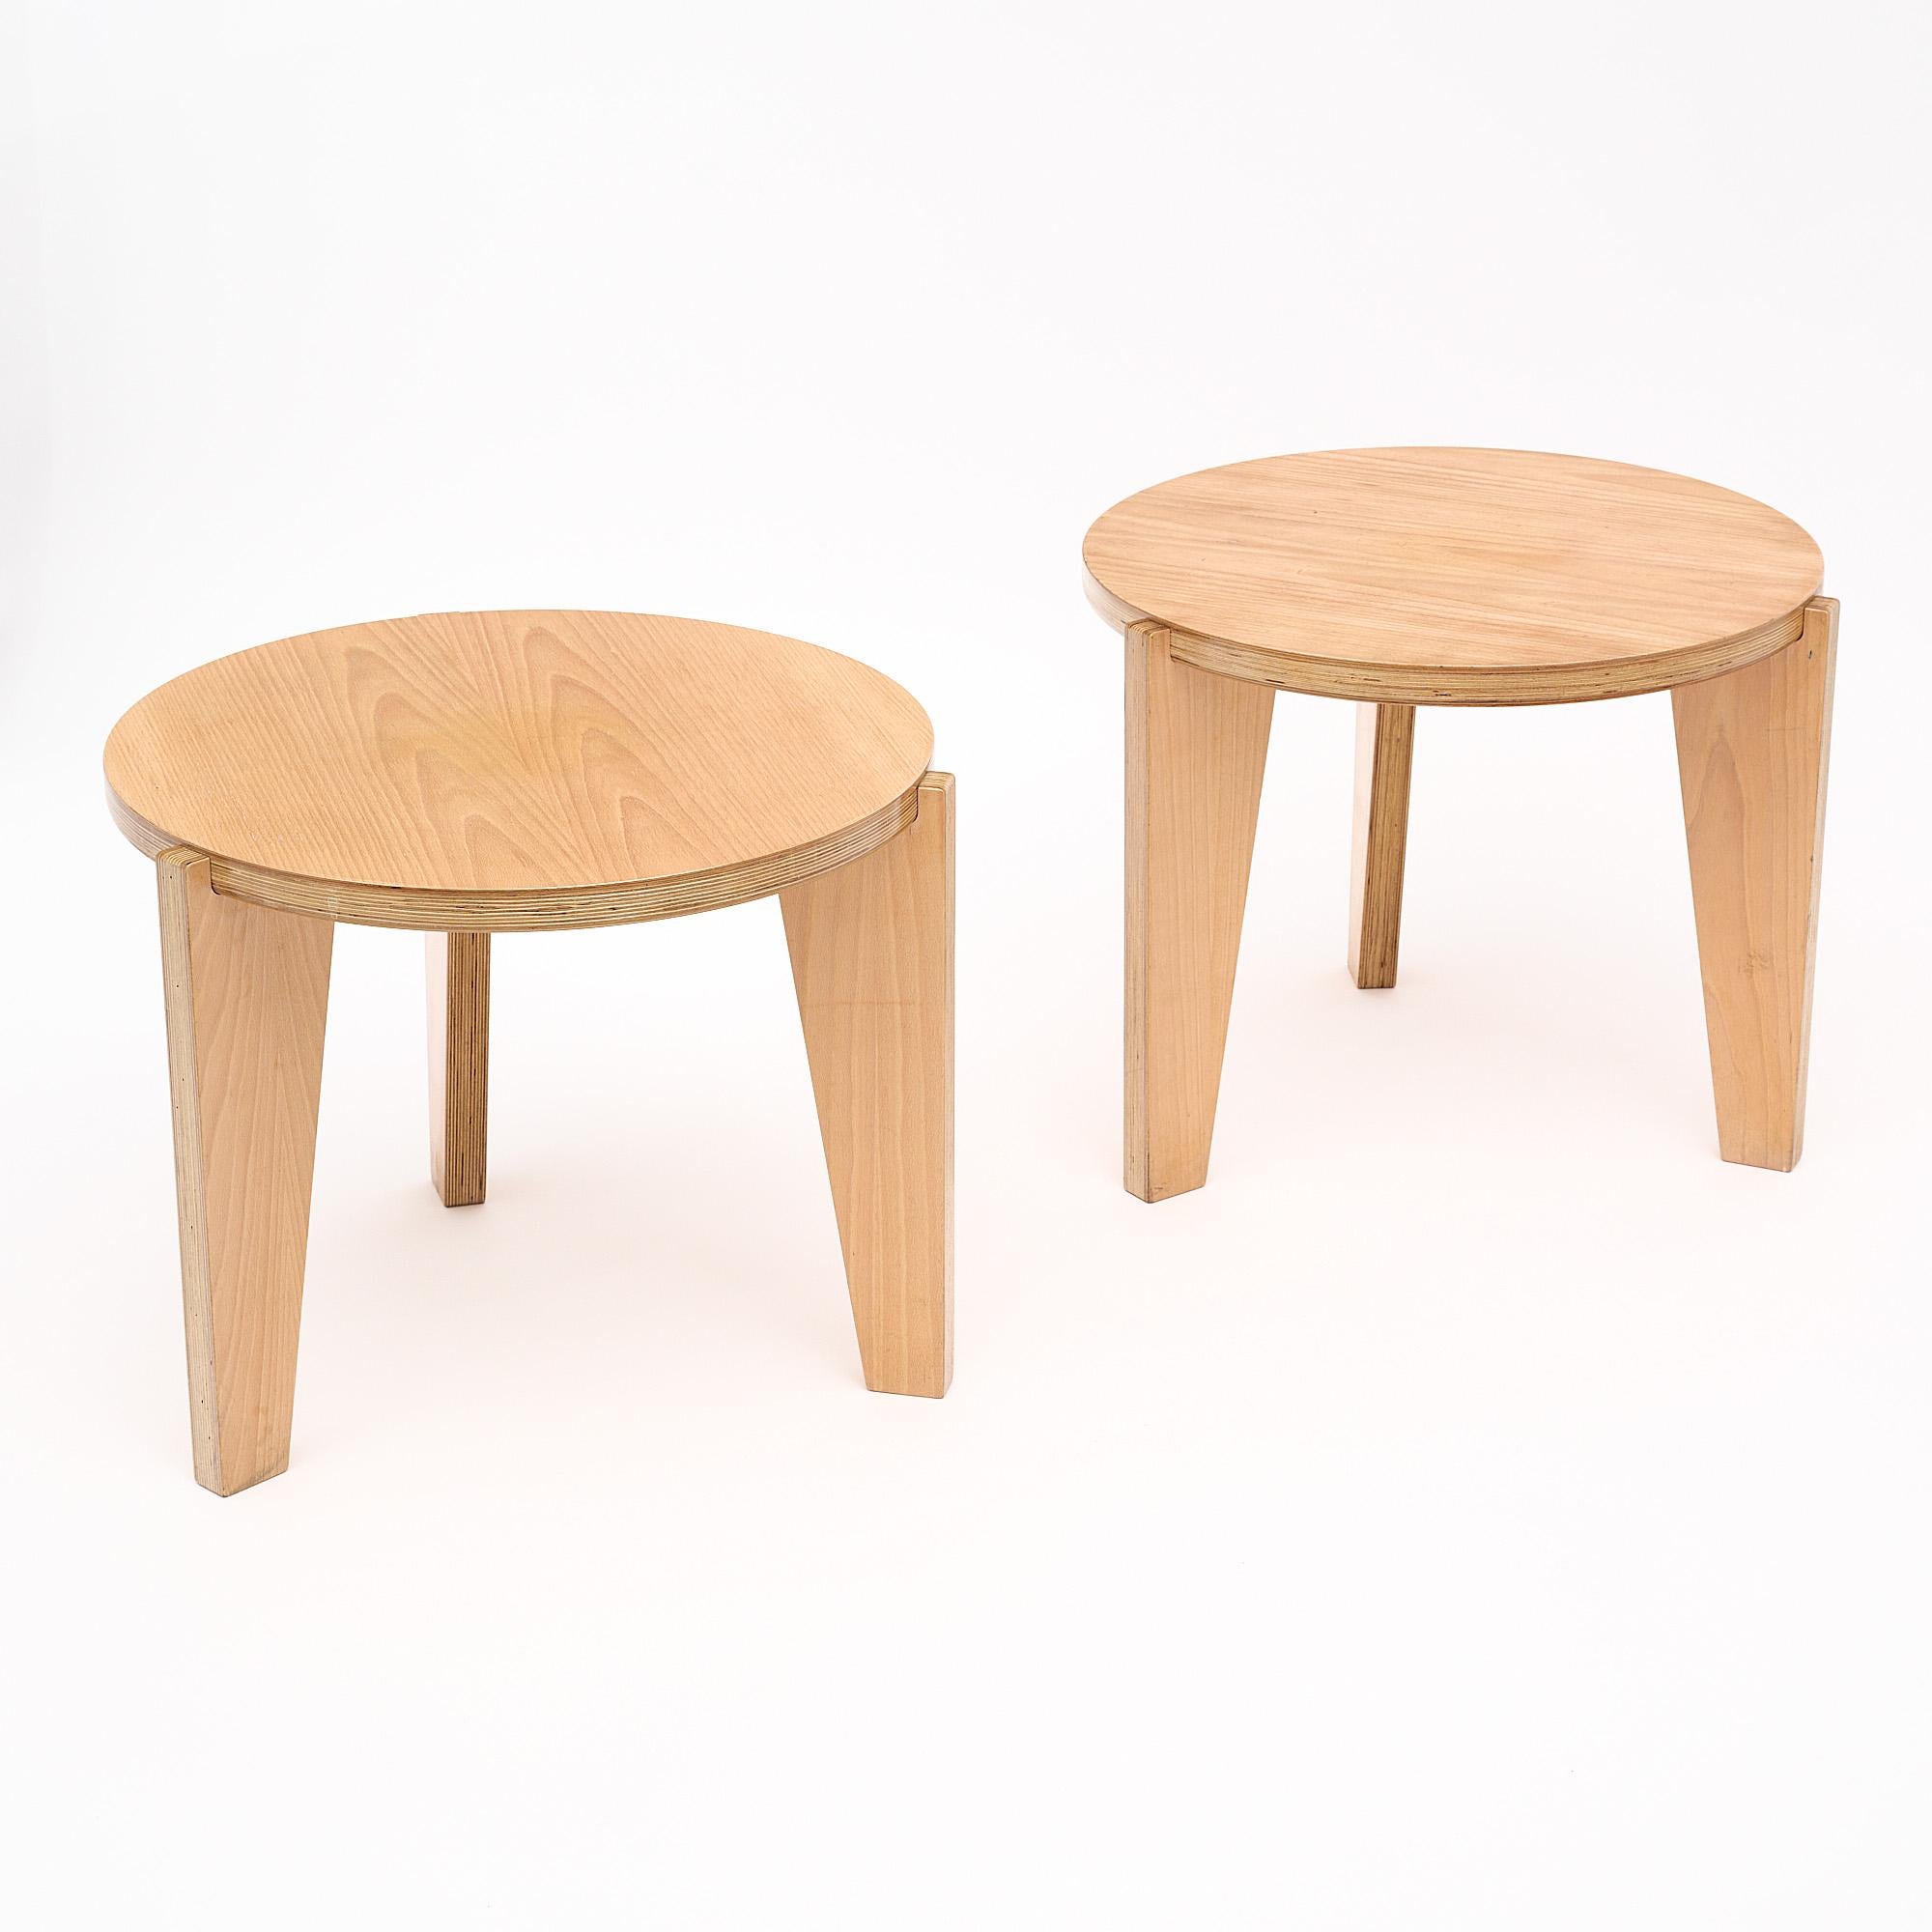 Pair of side tables, in the style of Pierre Jeanneret, tripod, of cerused wood.